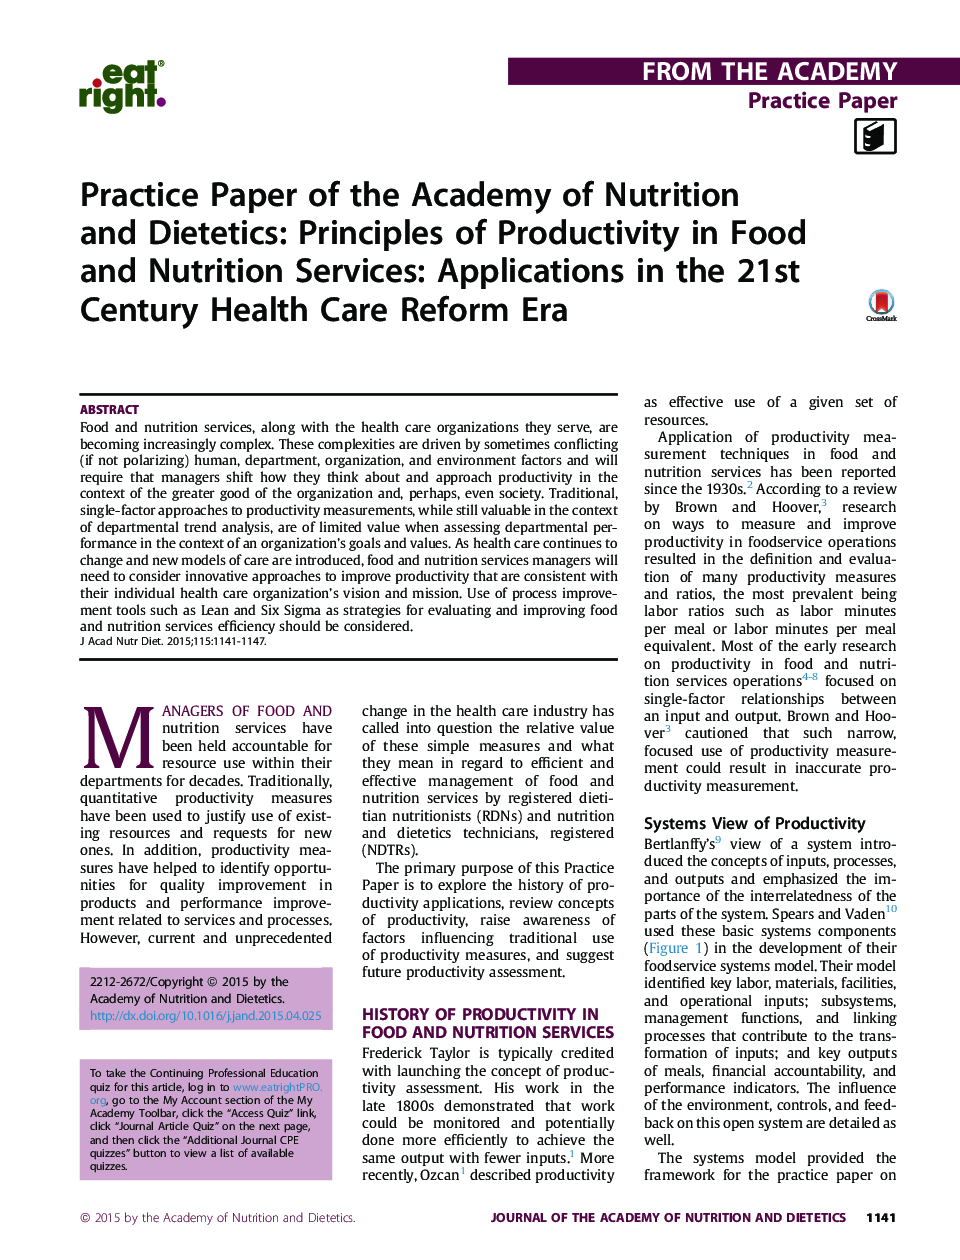 Practice Paper of the Academy of Nutrition and Dietetics: Principles of Productivity in Food and Nutrition Services: Applications in the 21st Century Health Care Reform Era 